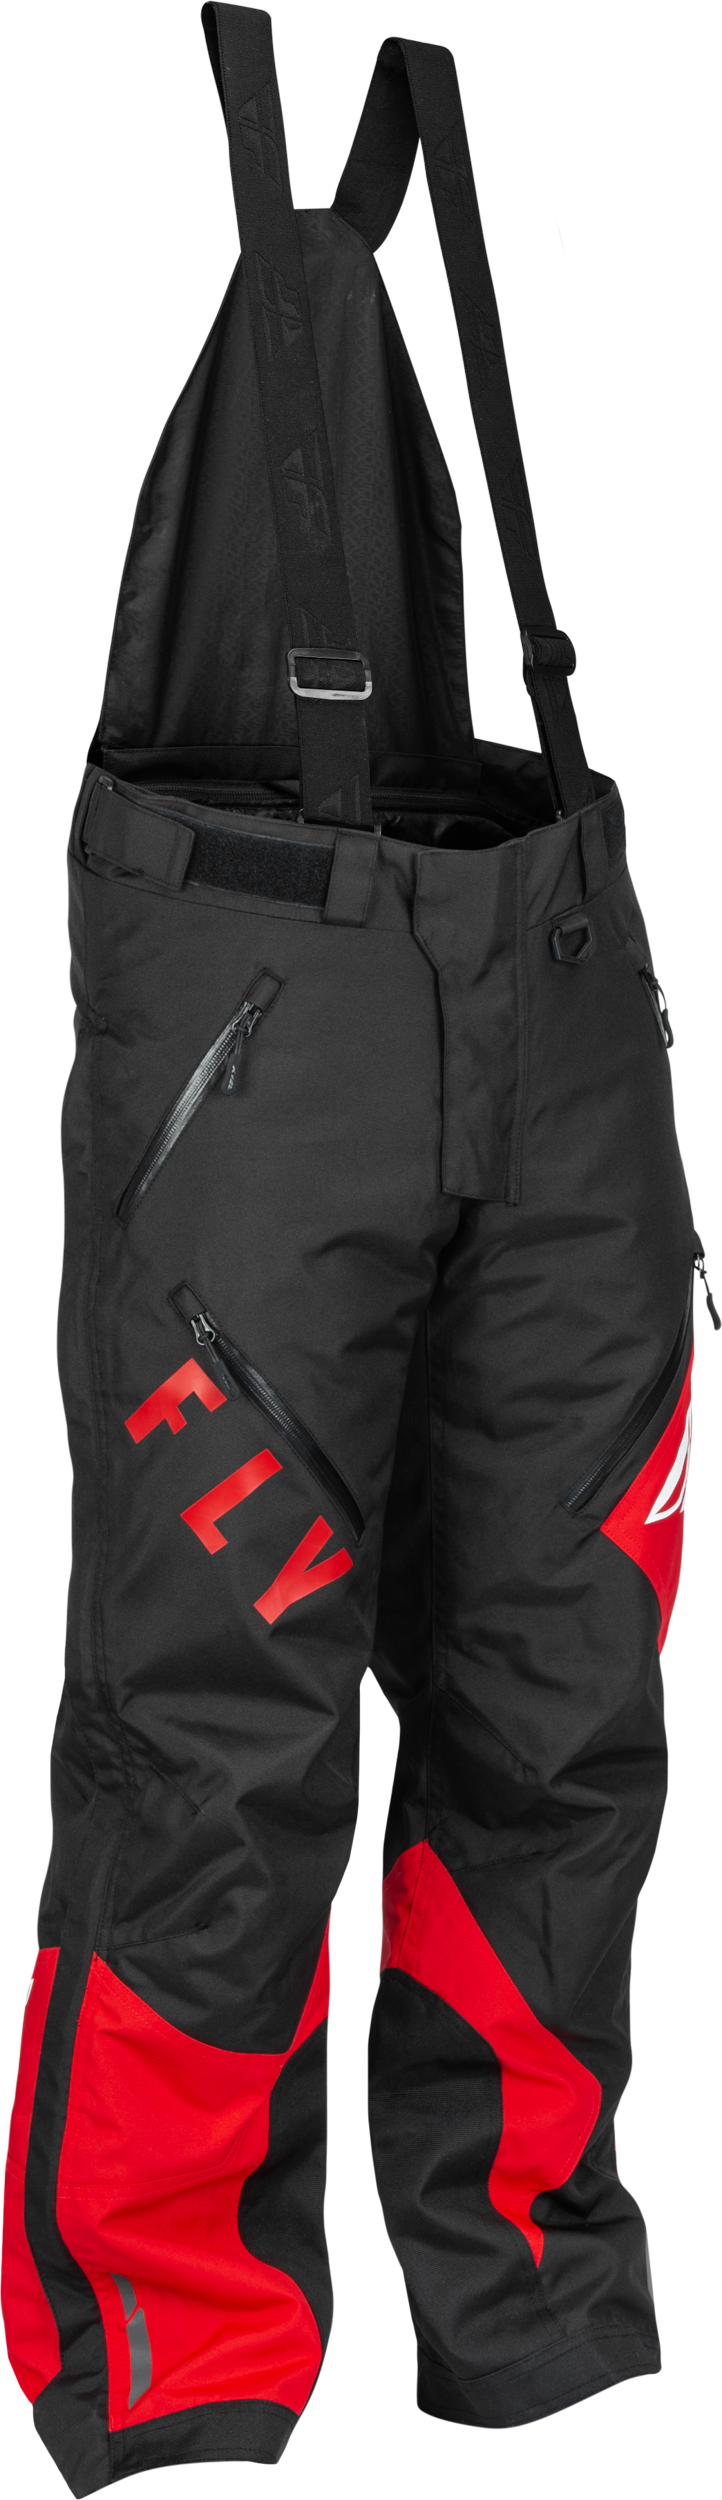 FLY RACING Snx Pro Pant Black/Red Md 470-6401M